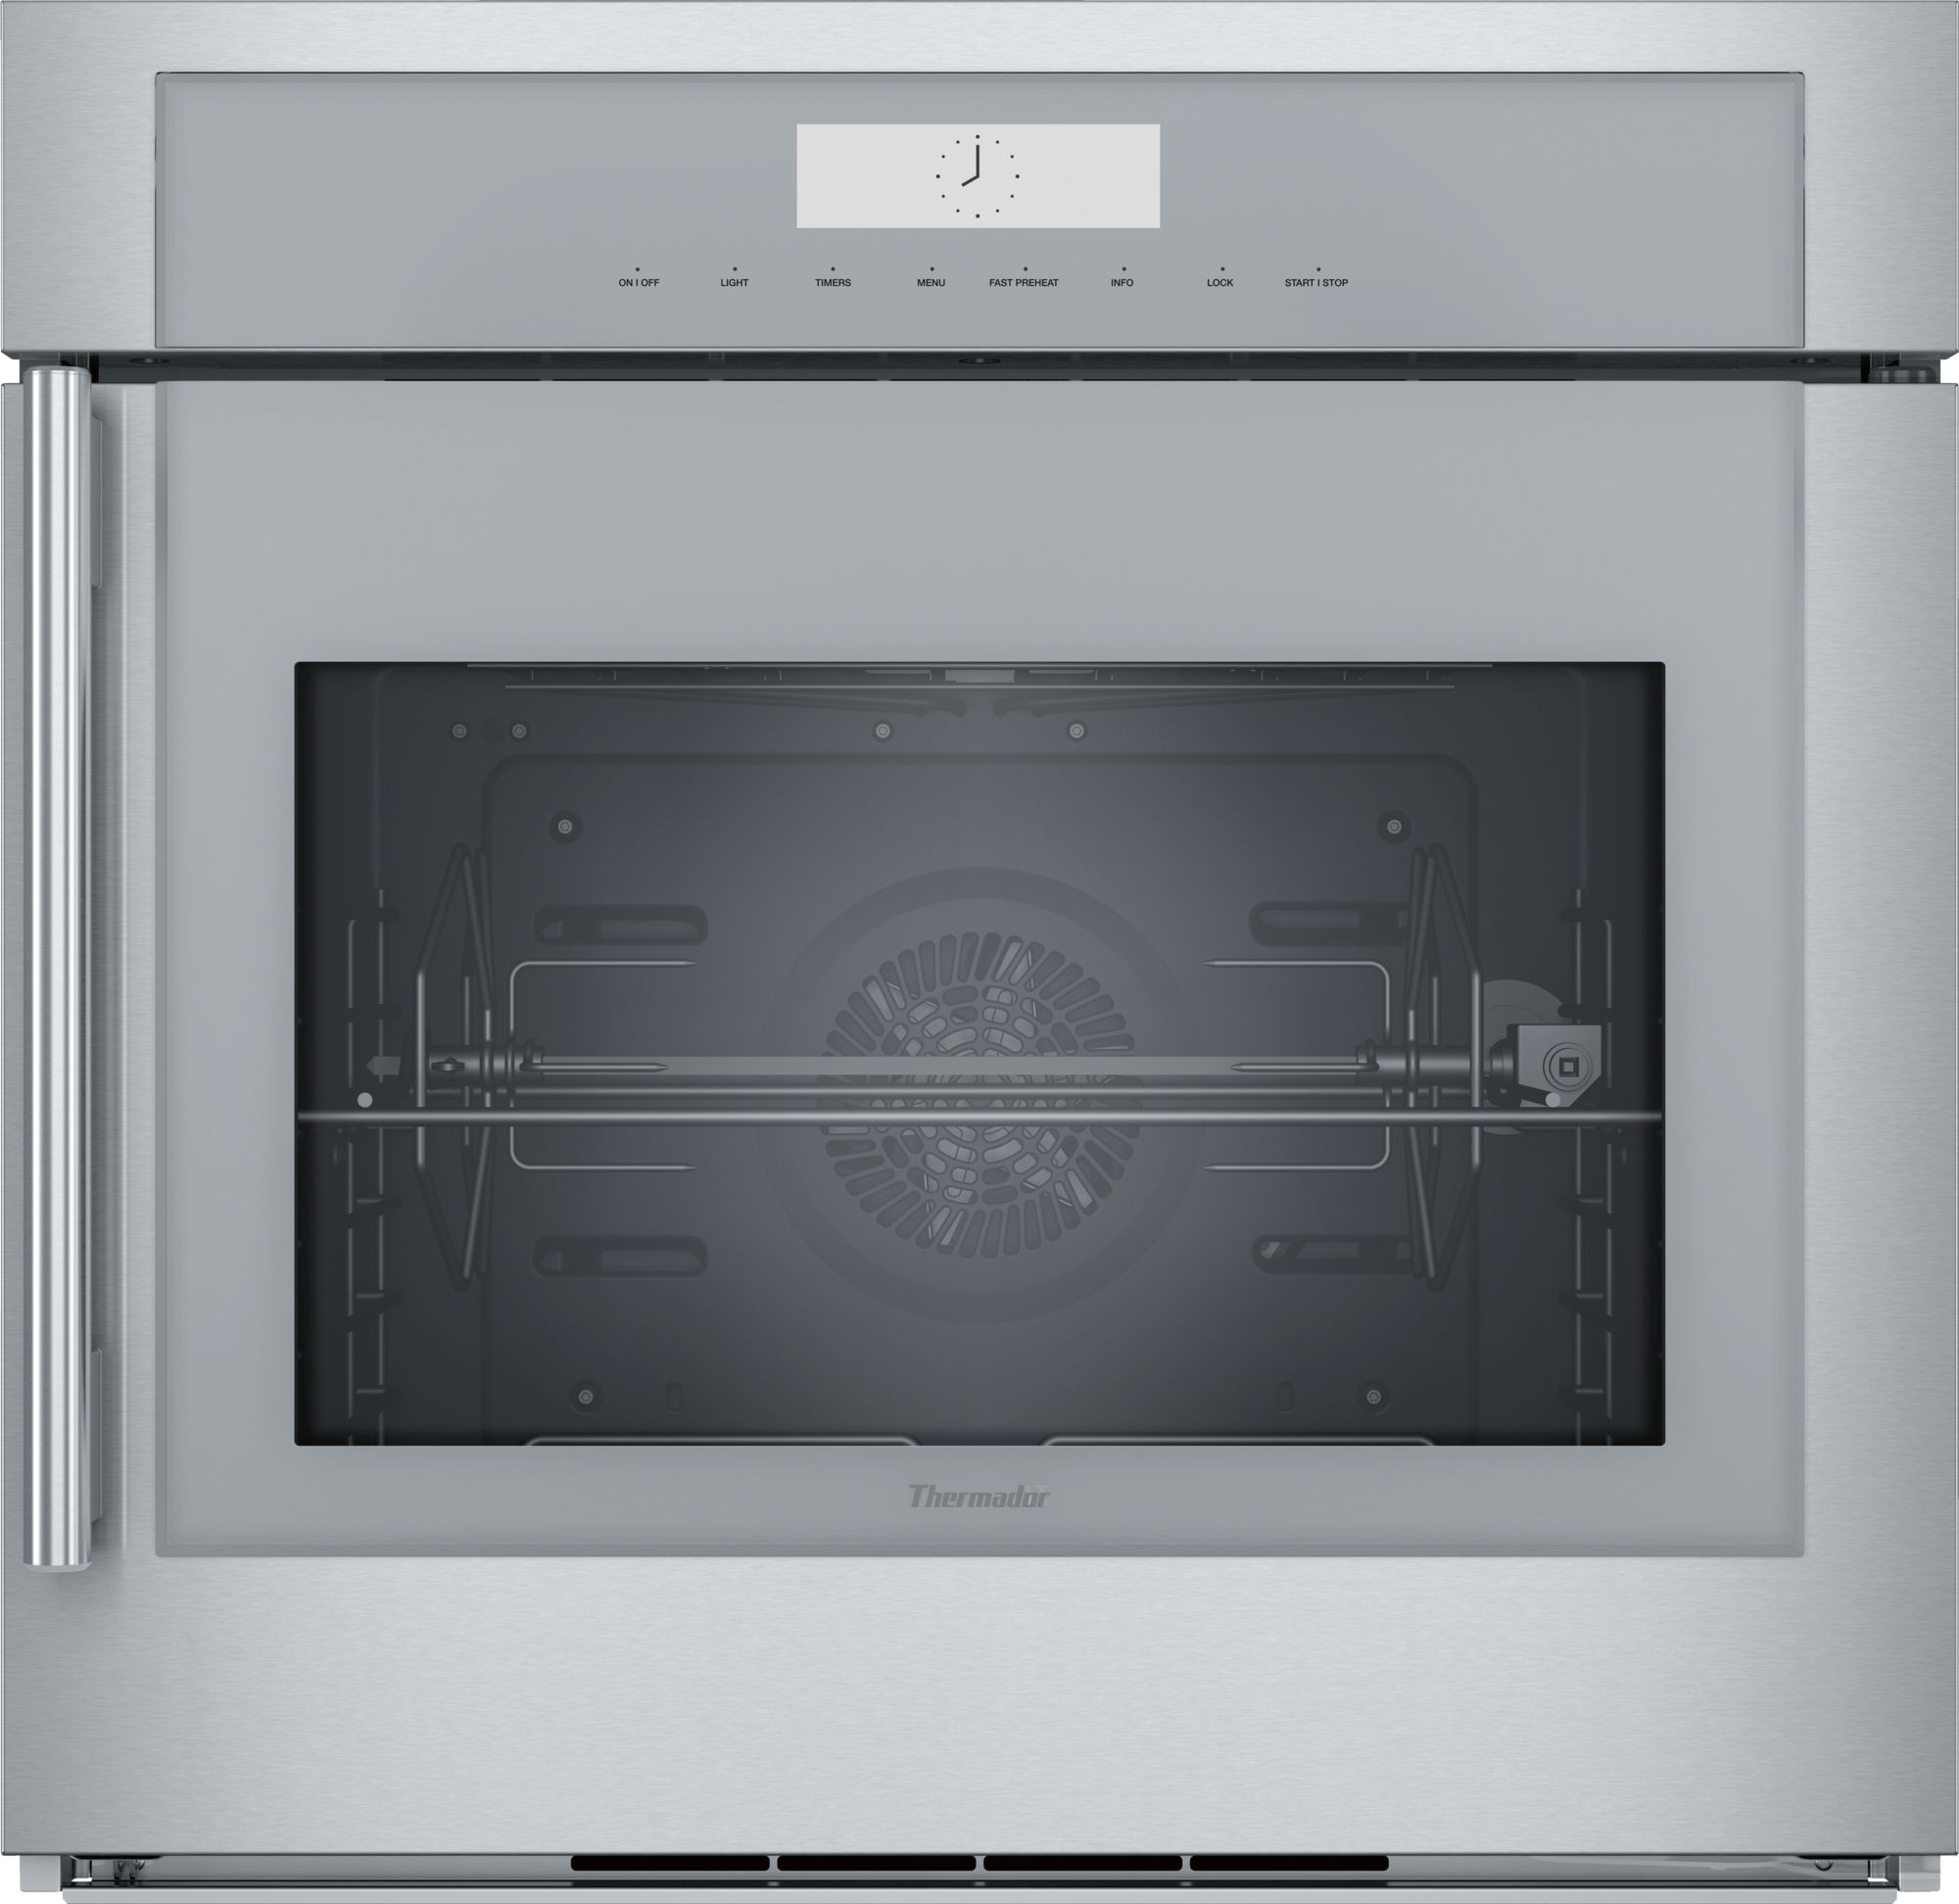 Thermador Masterpiece 30 Single Electric Wall Oven MED301RWS